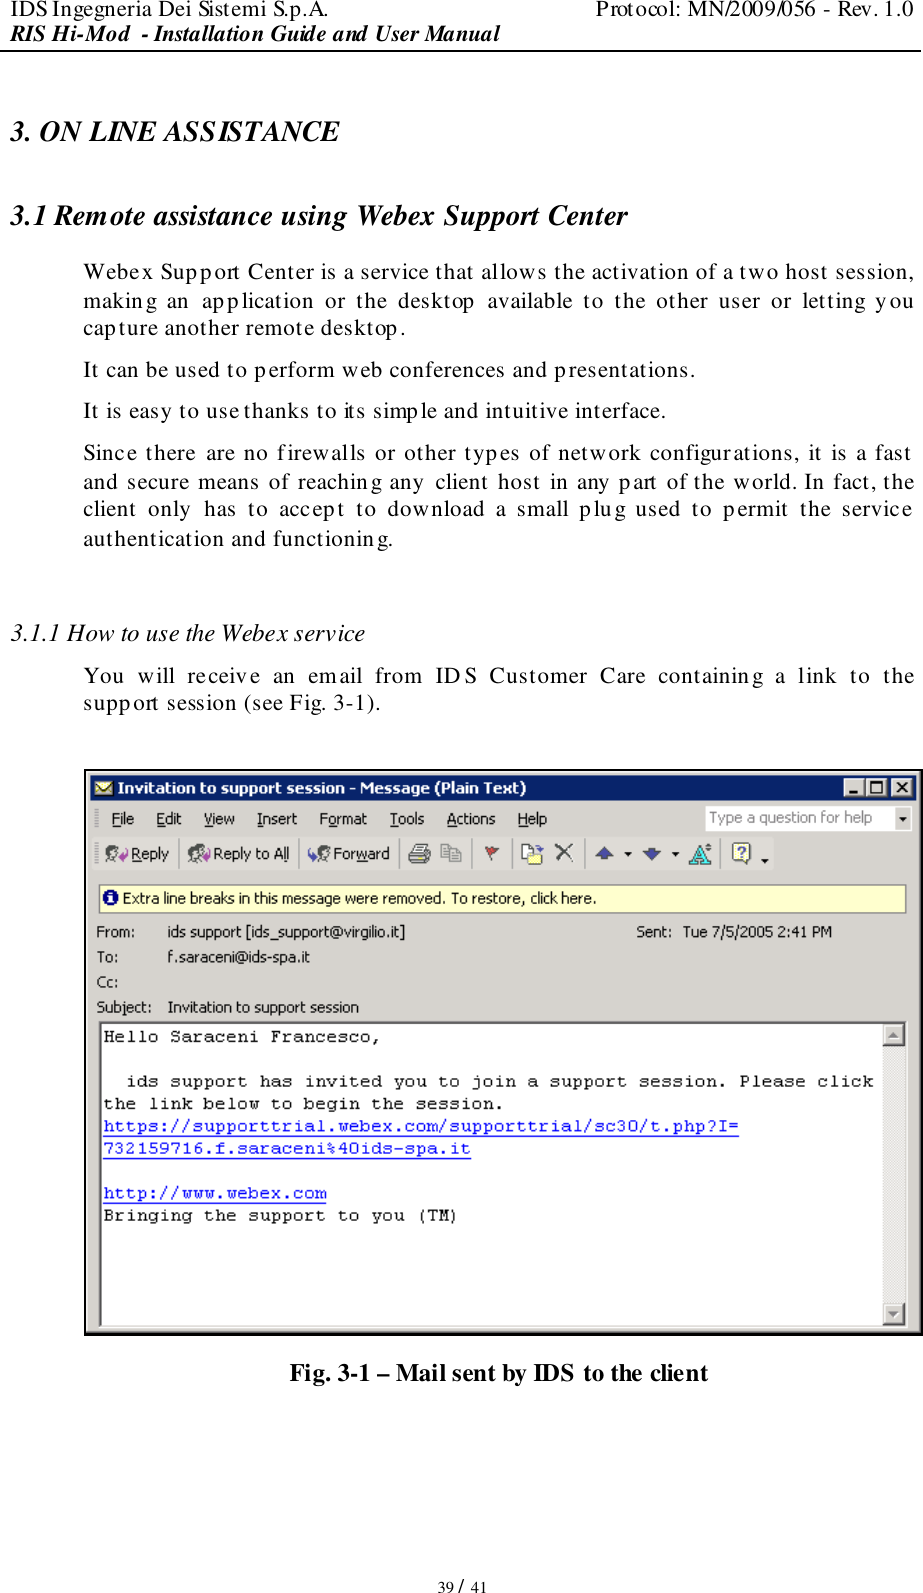 IDS Ingegneria Dei Sistemi S.p.A.  Protocol: MN/2009/056 - Rev. 1.0 RIS Hi-Mod  - Installation Guide and User Manual   39 / 41 3. ON LINE ASSISTANCE 3.1 Remote assistance using Webex Support Center Webex Supp ort Center is a service that allows the activation of a two host session, making  an  app lication  or  the  desktop  available  to  the  other  user  or  letting  you cap ture another remote desktop. It can be used to perform web conferences and p resentations. It is easy to use thanks to its simple and intuitive interface. Since there  are no firewalls or other types of network configurations, it is a fast  and secure means of reaching any client host in any part of the world. In fact, the client  only  has  to  accept  to  download  a  small  p lug  used  to  permit  the  service authentication and functioning.  3.1.1 How to use the Webex service  You  will  receive  an  email  from  ID S  Customer  Care  containing  a  link  to  the support session (see Fig. 3-1).   Fig. 3-1 – Mail sent by IDS to the client  